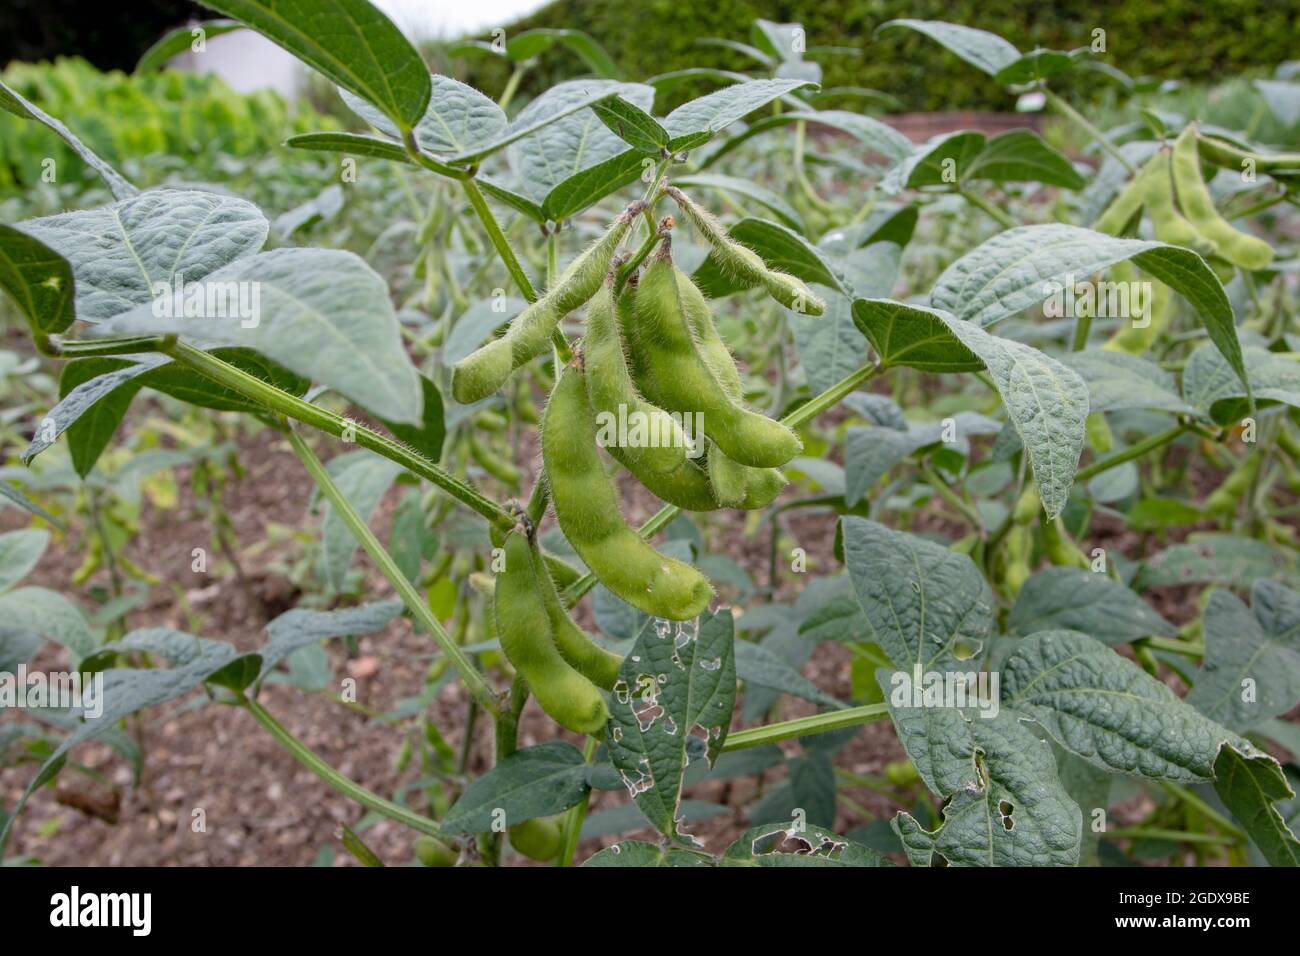 Glycine max plants with beans. Soybean or soya bean plantation. Stock Photo